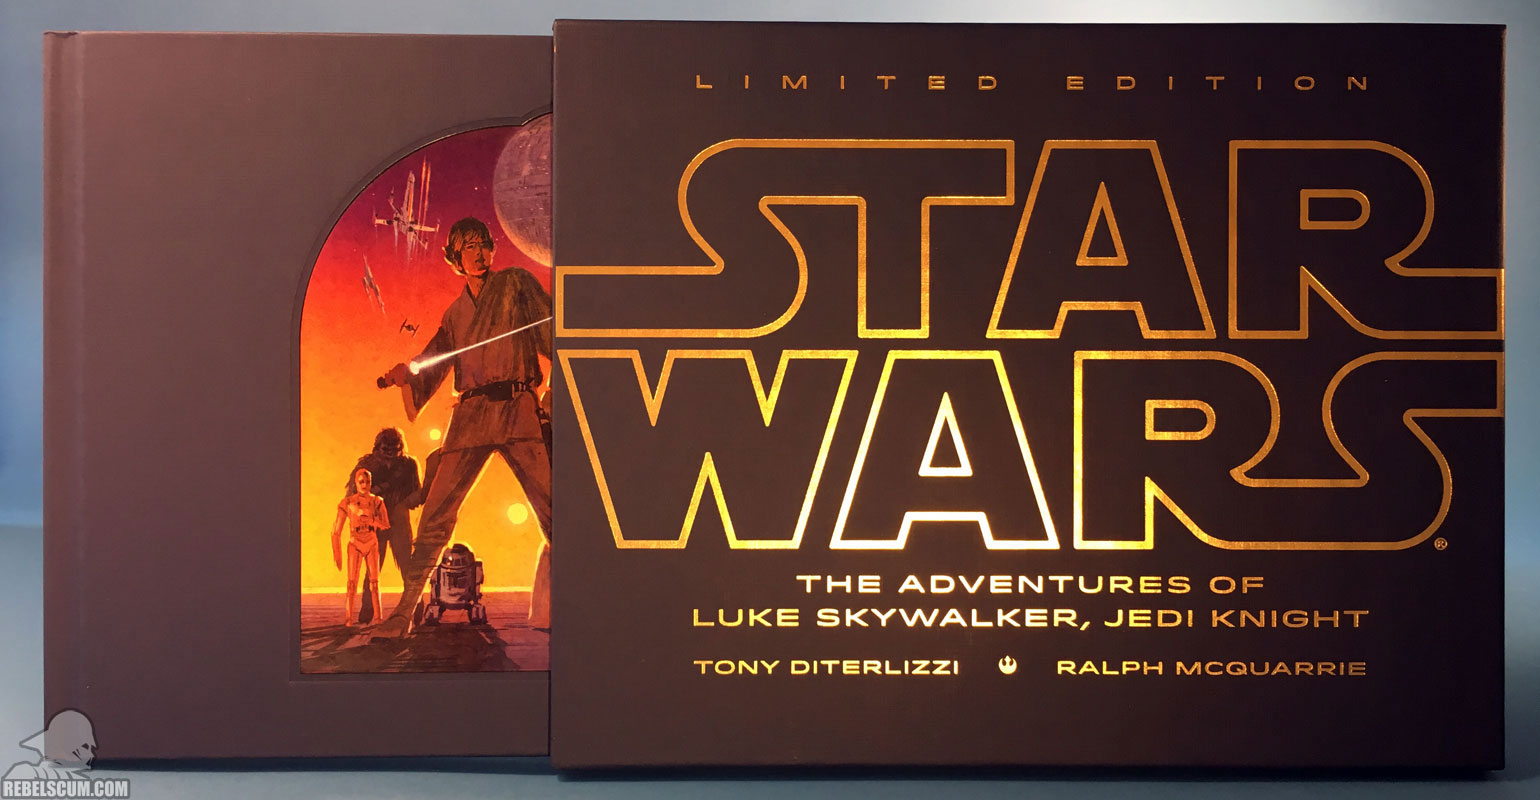 The Adventures of Luke Skywalker, Jedi Knight [Limited Edition] (Slipcase with Book)